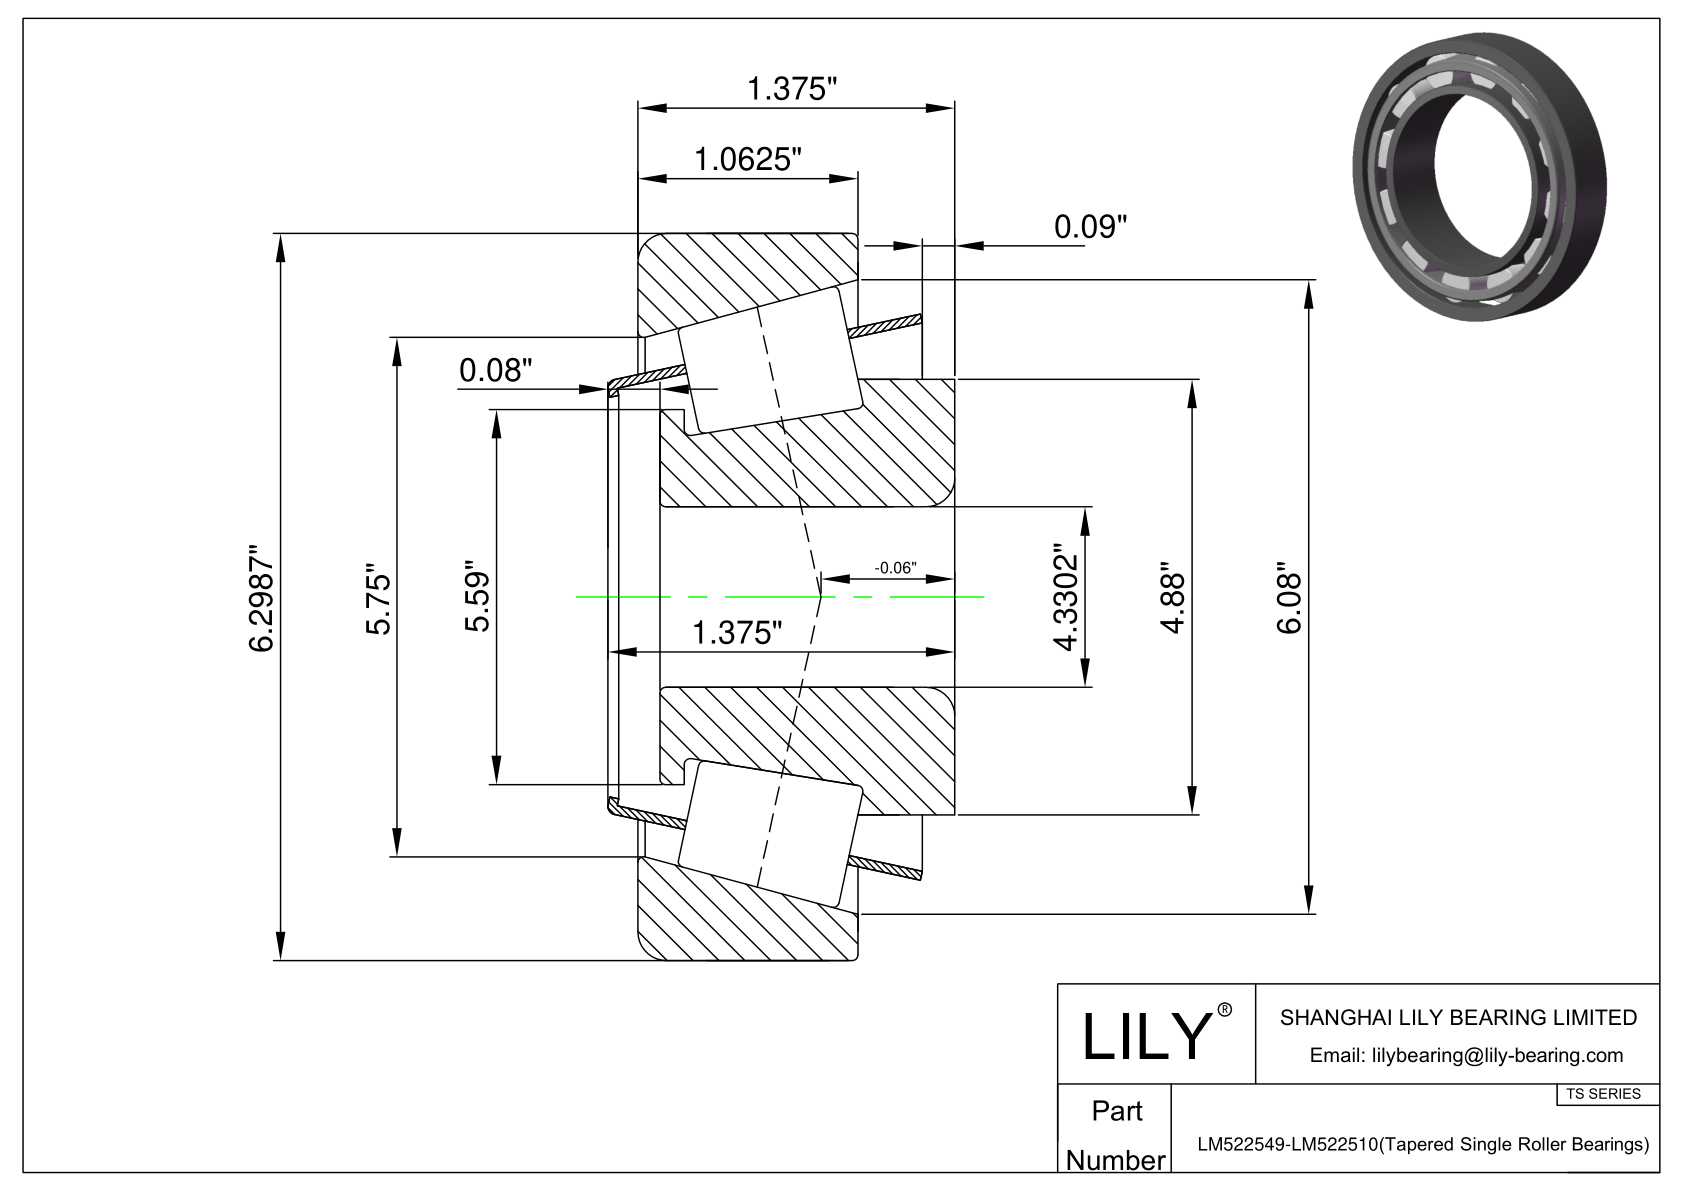 LM522549-LM522510 TS (Tapered Single Roller Bearings) (Imperial) cad drawing